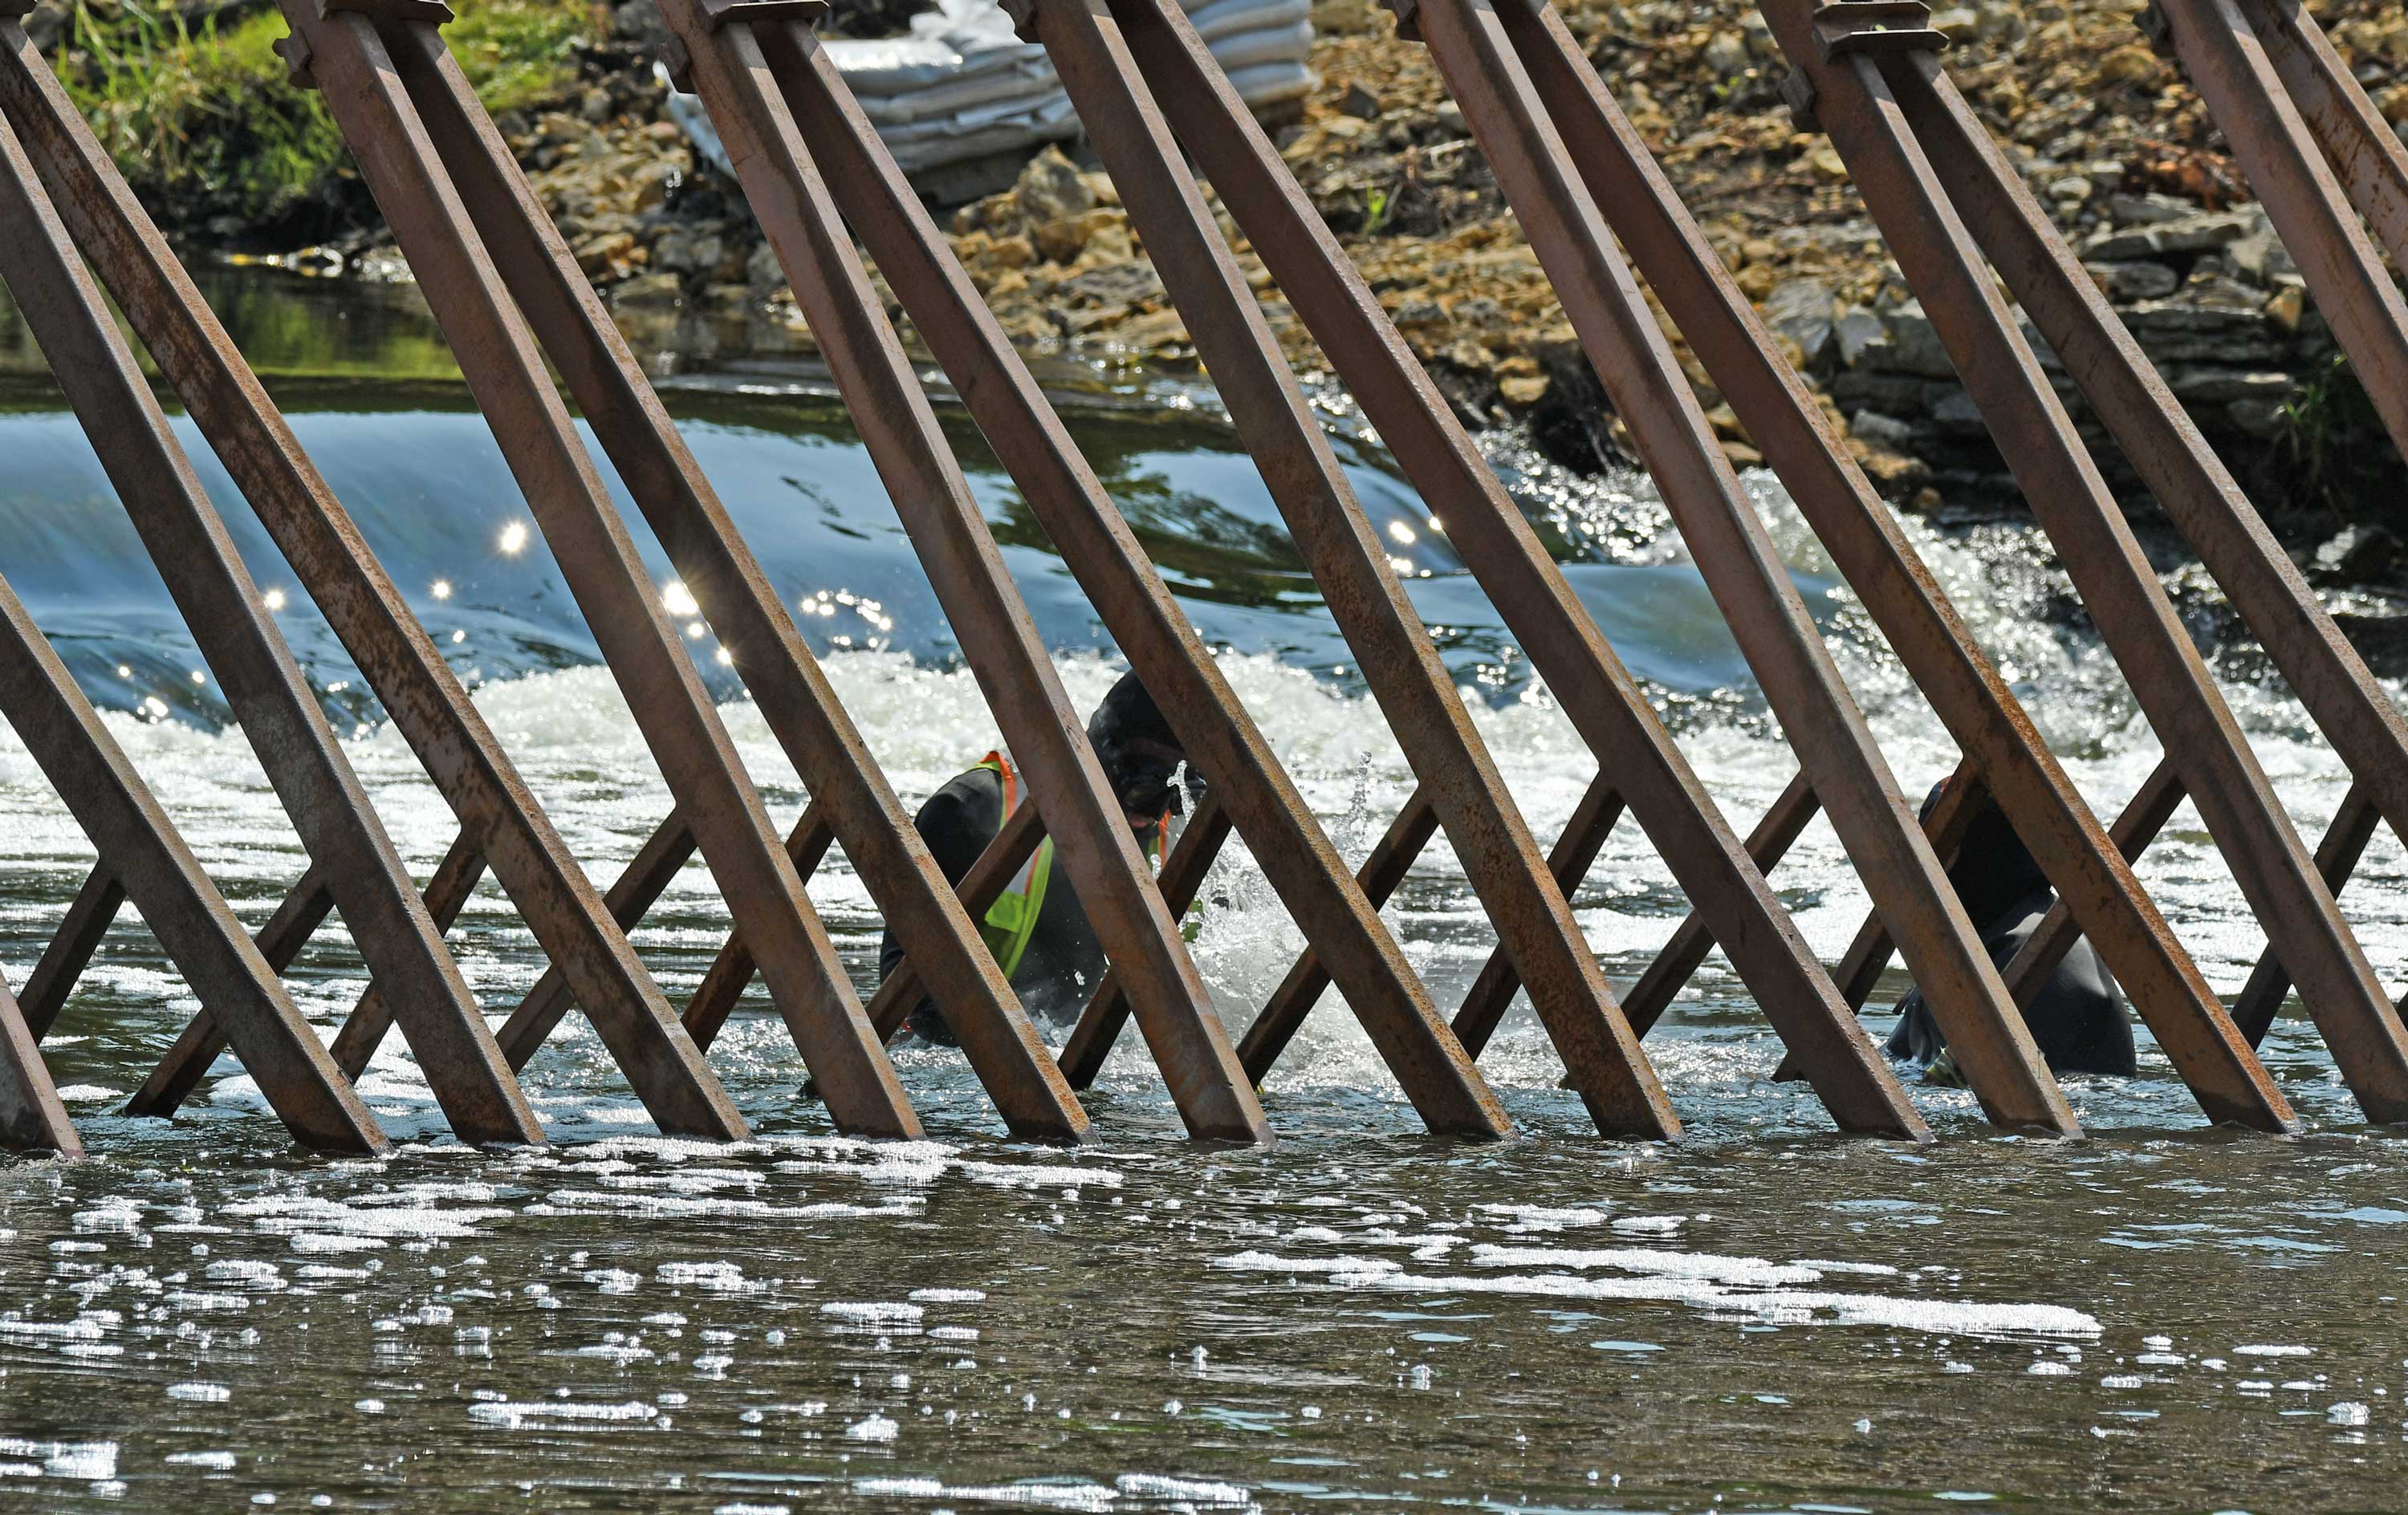 The cofferdam had metal frames for support.